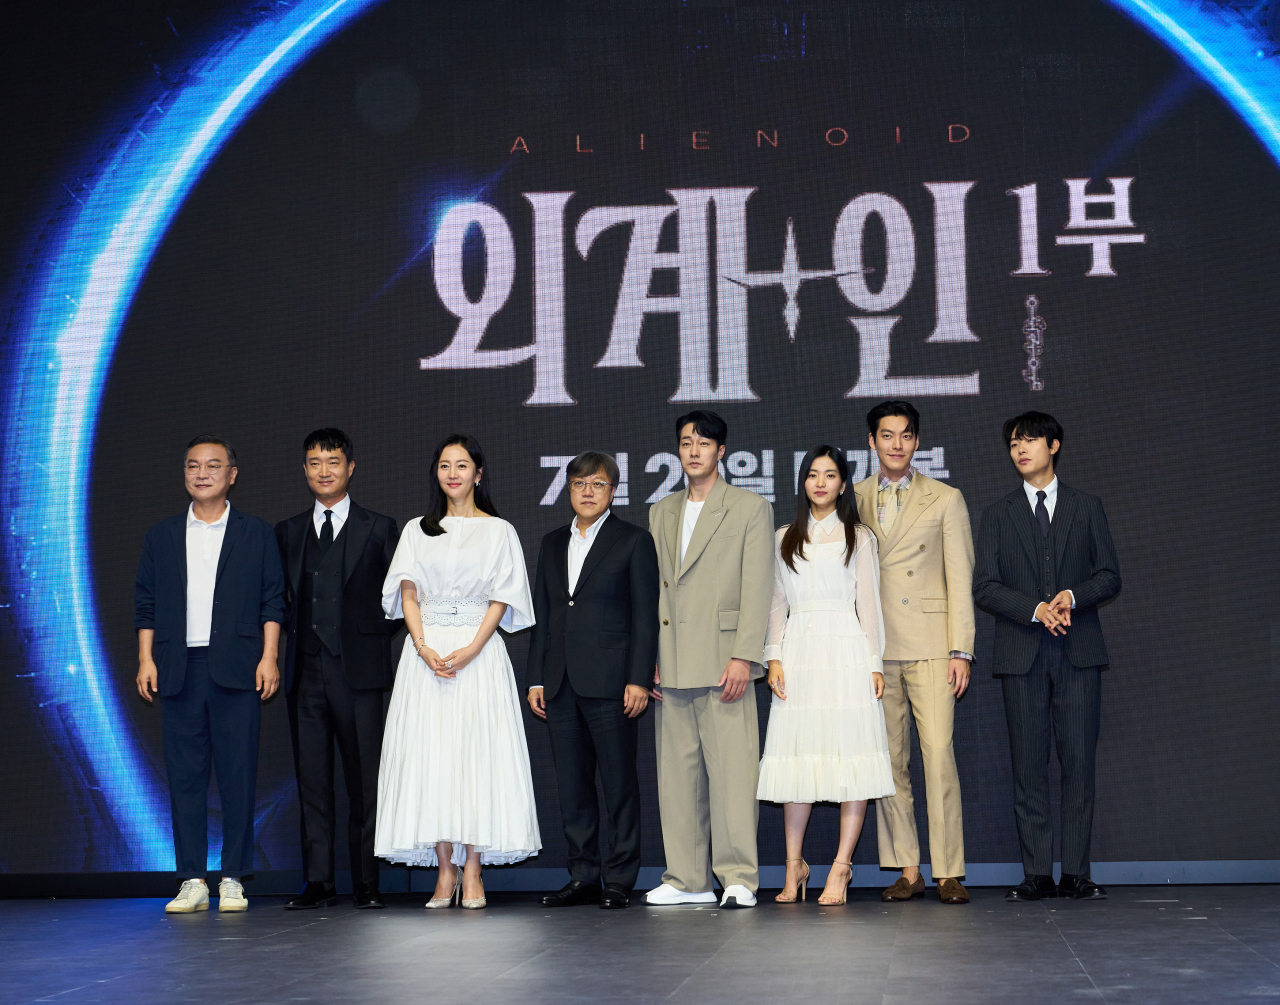 From left: Kim Eui-sung, Jo Woo-jin, Yeom Jung-ah, director Choi Dong-hoon, So Ji-sub, Kim Tae-ri, Kim Woo-bin and Ryu Jun-yeol pose for a photo after the press conference for “Alienoid” held at Conrad Seoul hotel on Thursday. (CJ ENM)